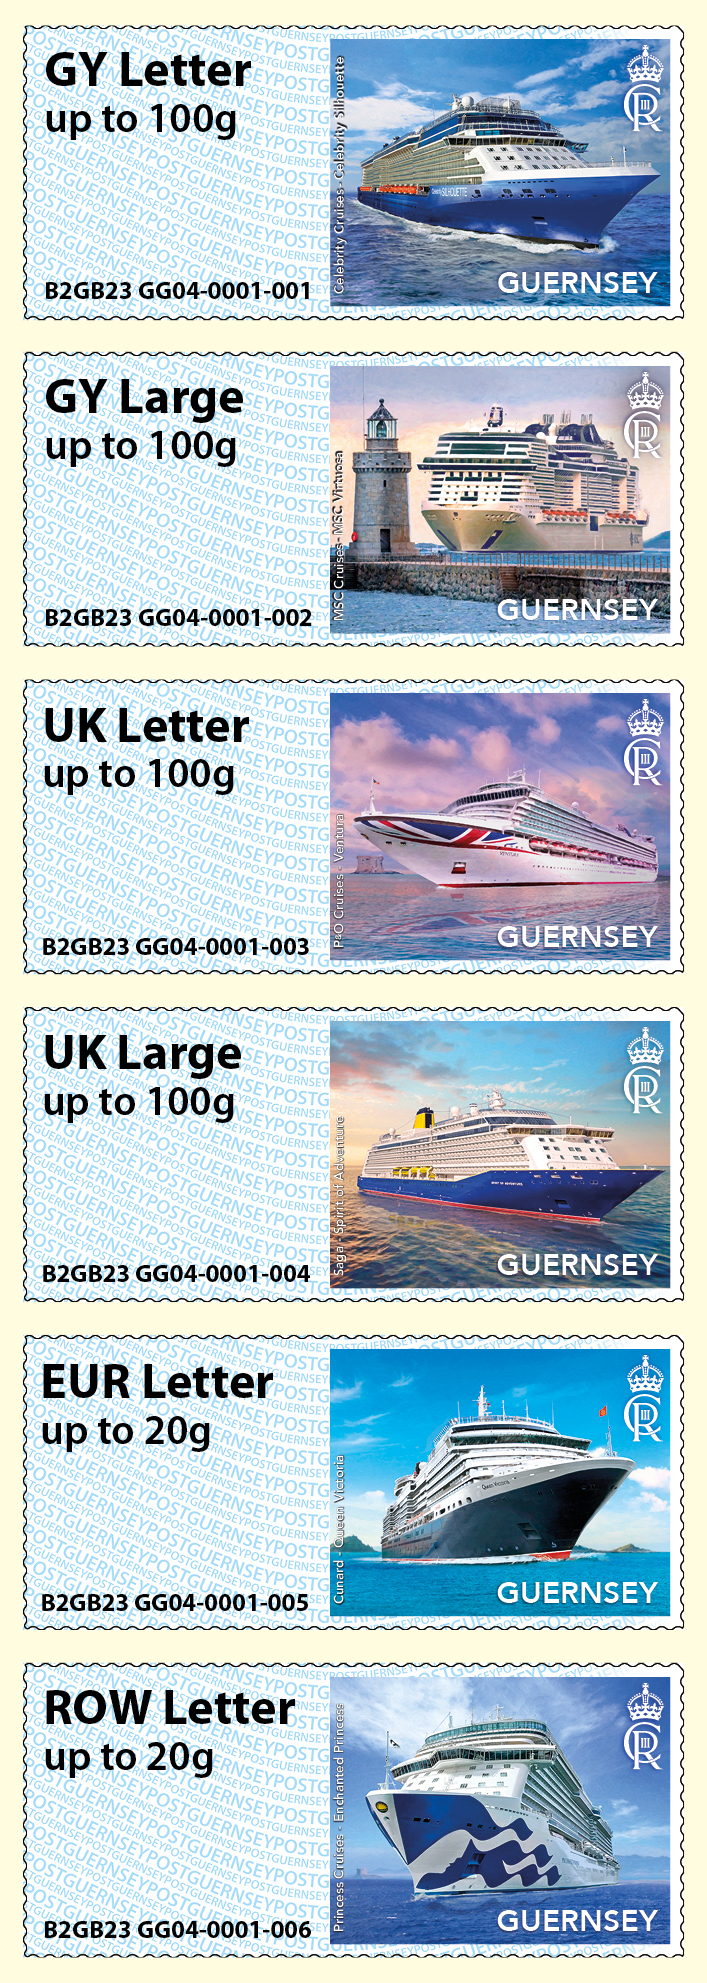 GG04 Series Visiting Cruise Ships collectors strips (Feb 23)